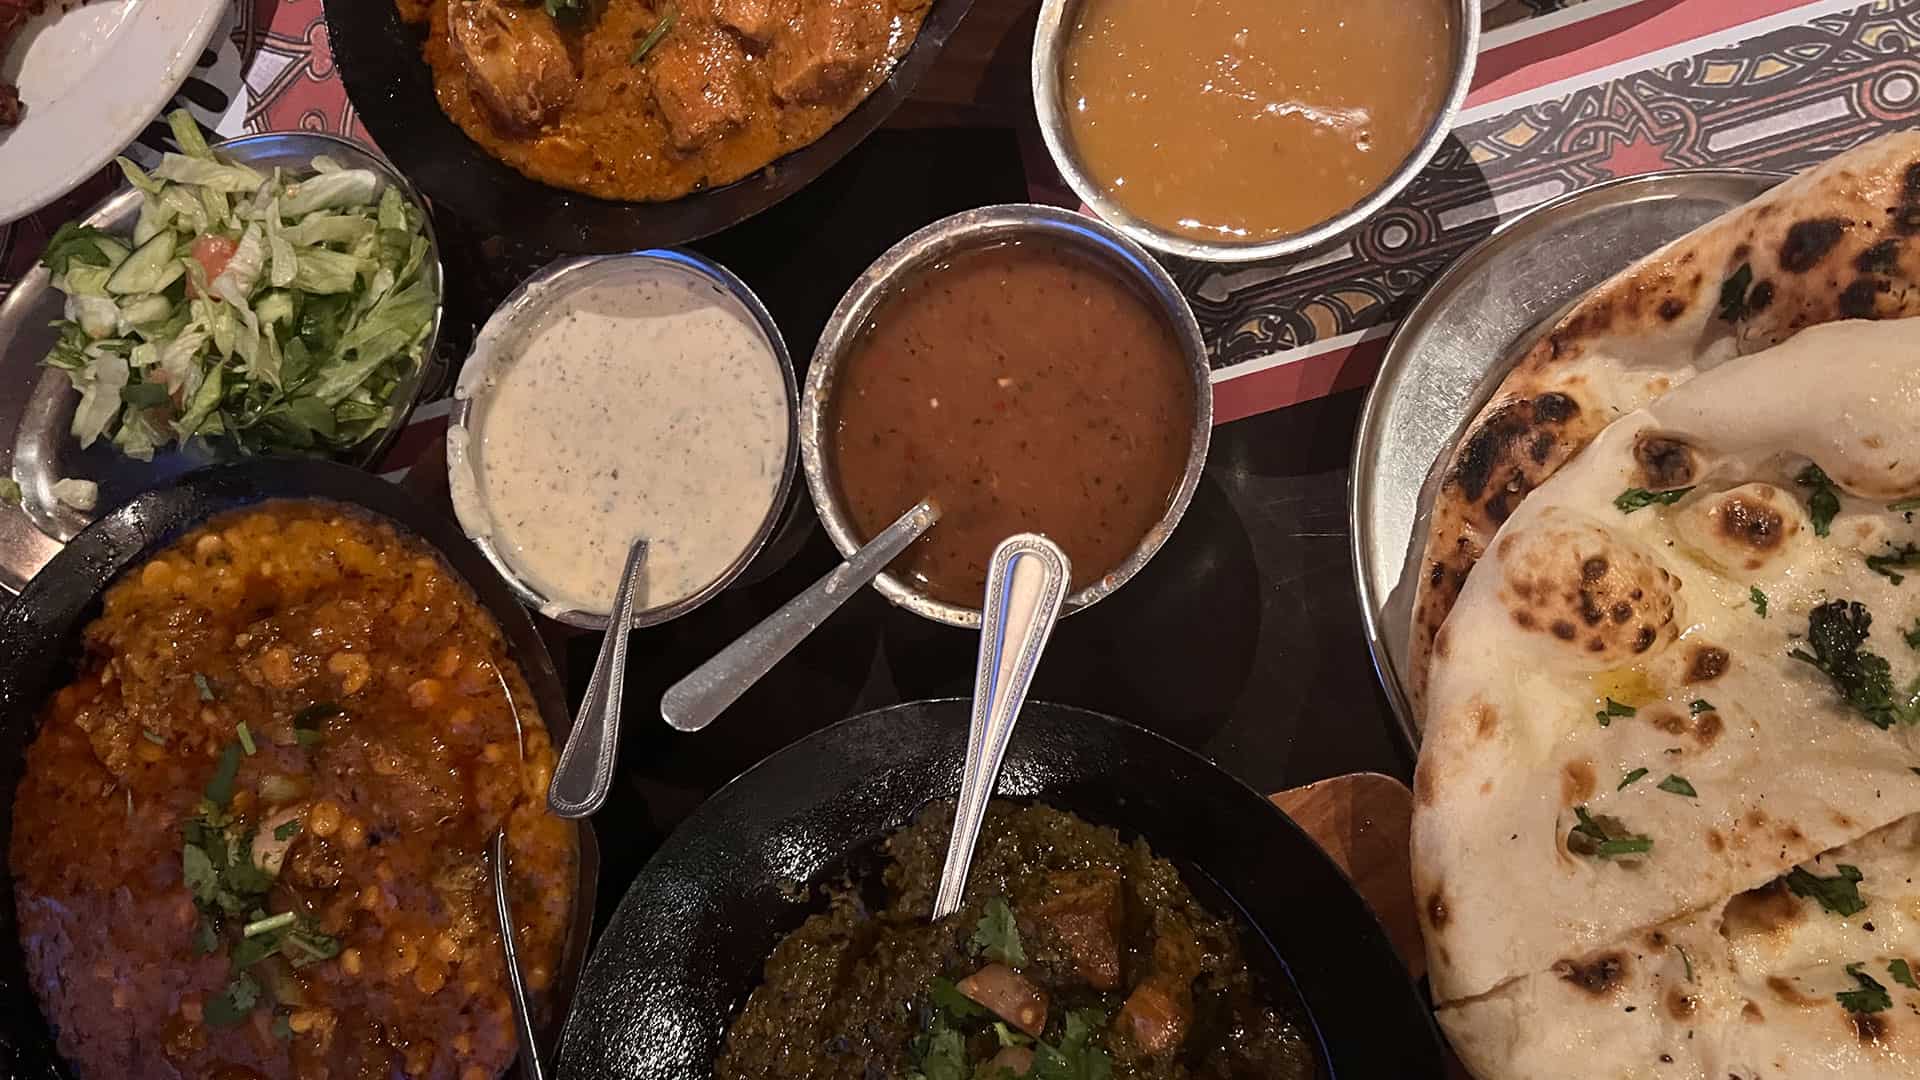 Indian, specifically Punjabi, dishes, dips and bread on the table at Tayyabs in London